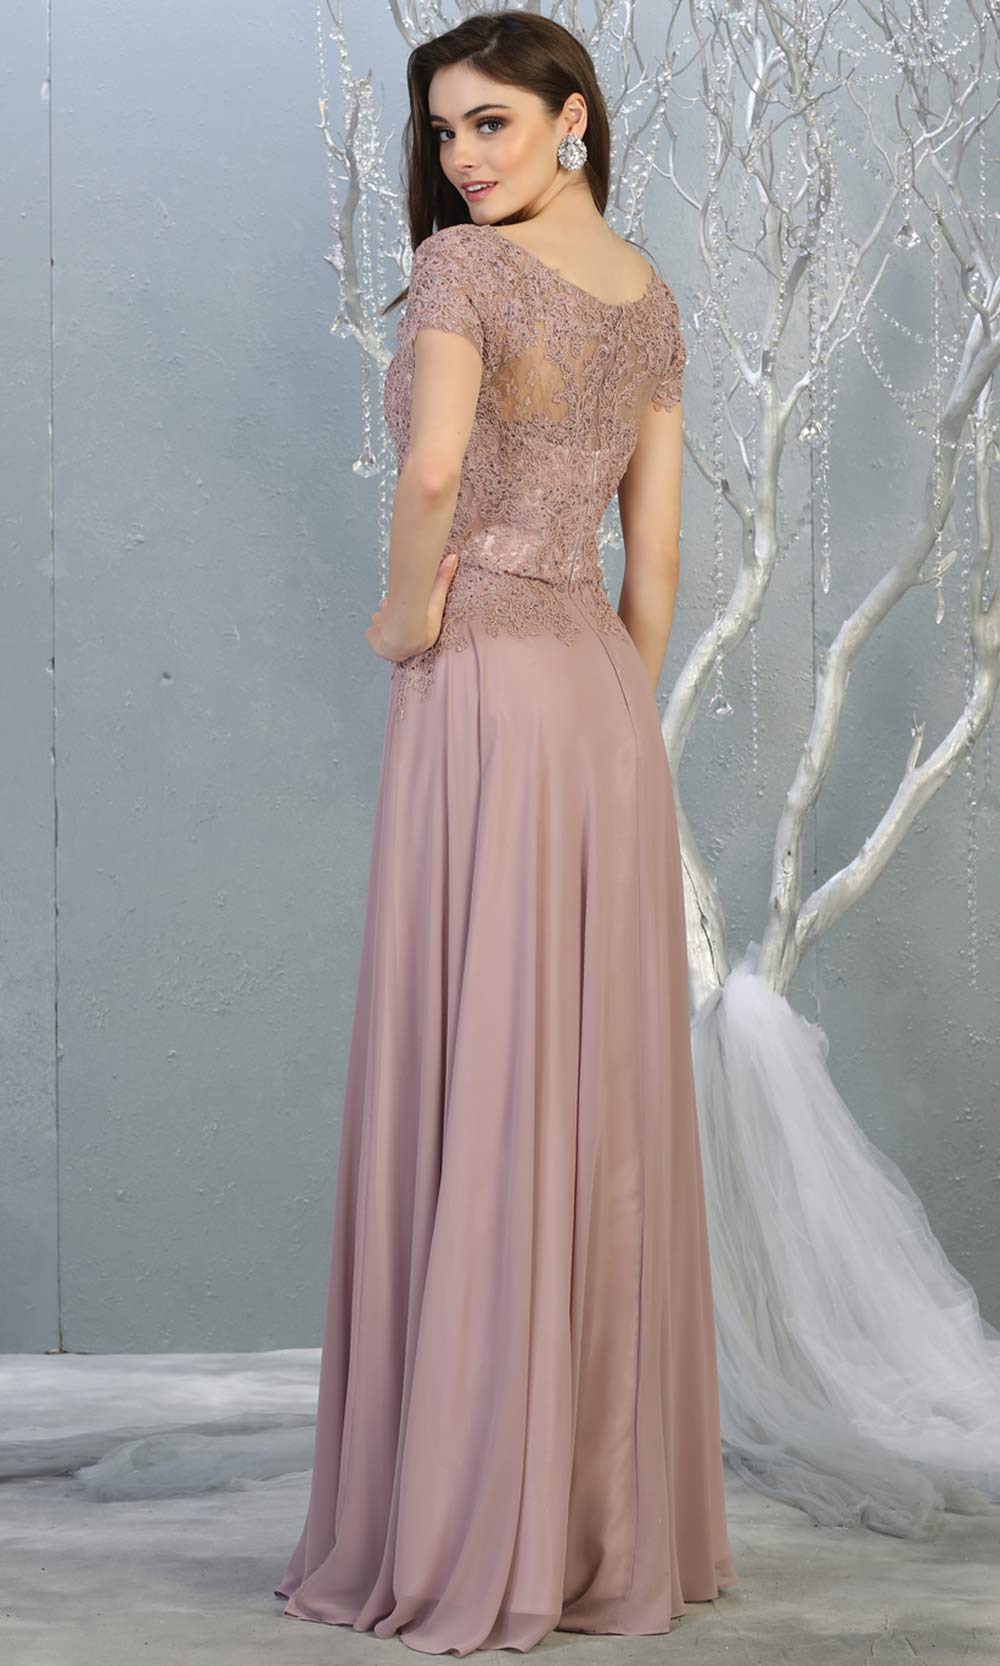 Mayqueen MQ1763 long mauve pink flowy modest dress with cap sleeves & lace top. This dusty rose dress is perfect for mother of the bride, formal wedding guest dress, covered up evening dress. It has a high neck & high back. Plus sizes avail-b.jpg